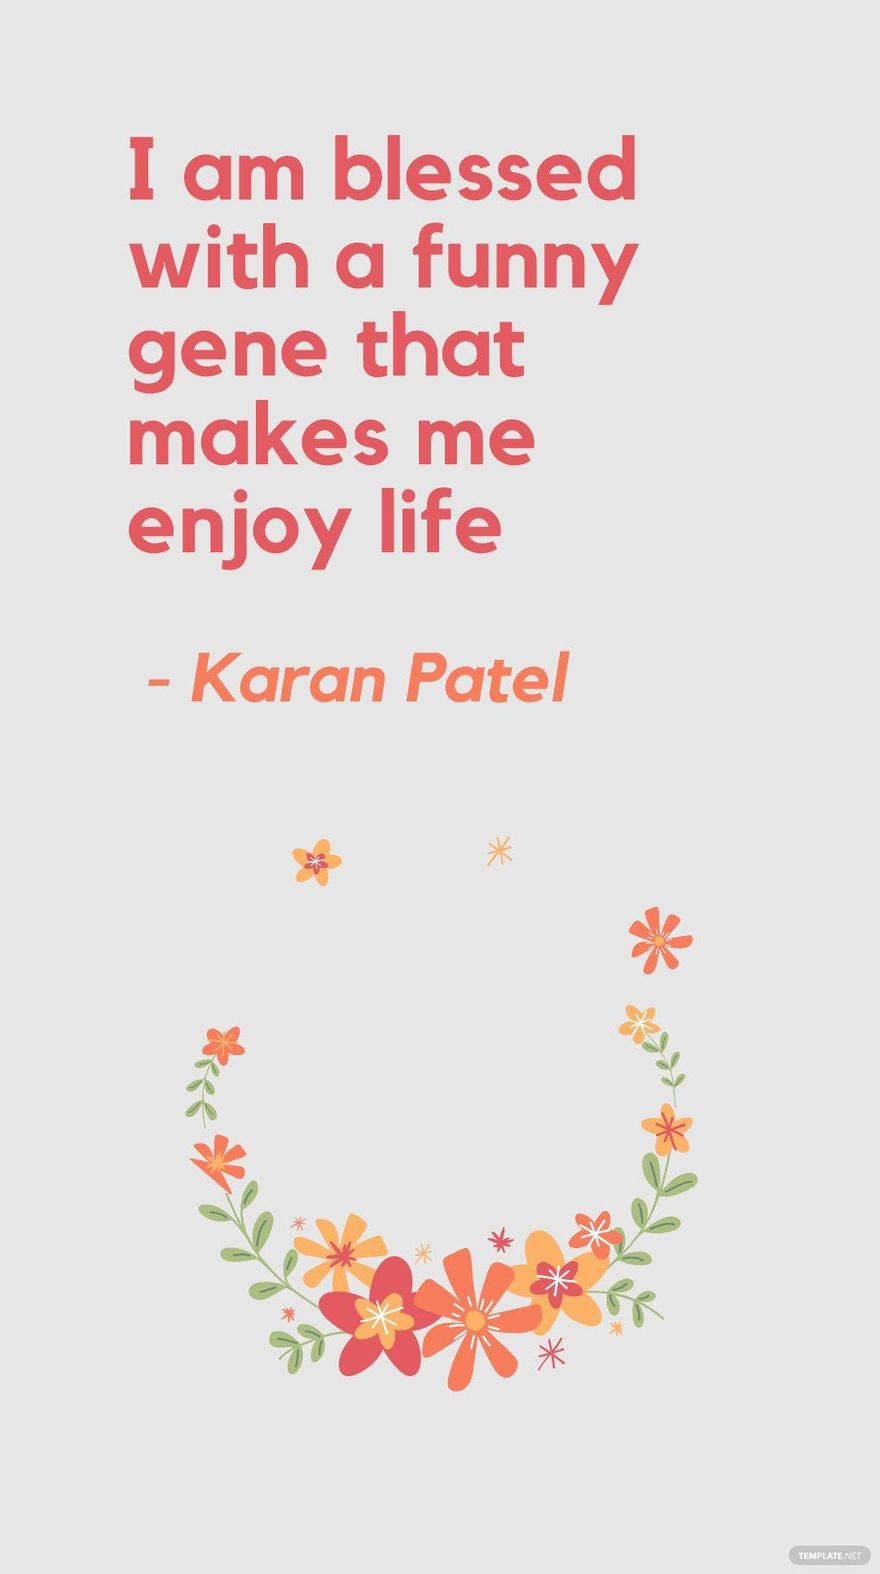 Karan Patel - I am blessed with a funny gene that makes me enjoy life in JPG